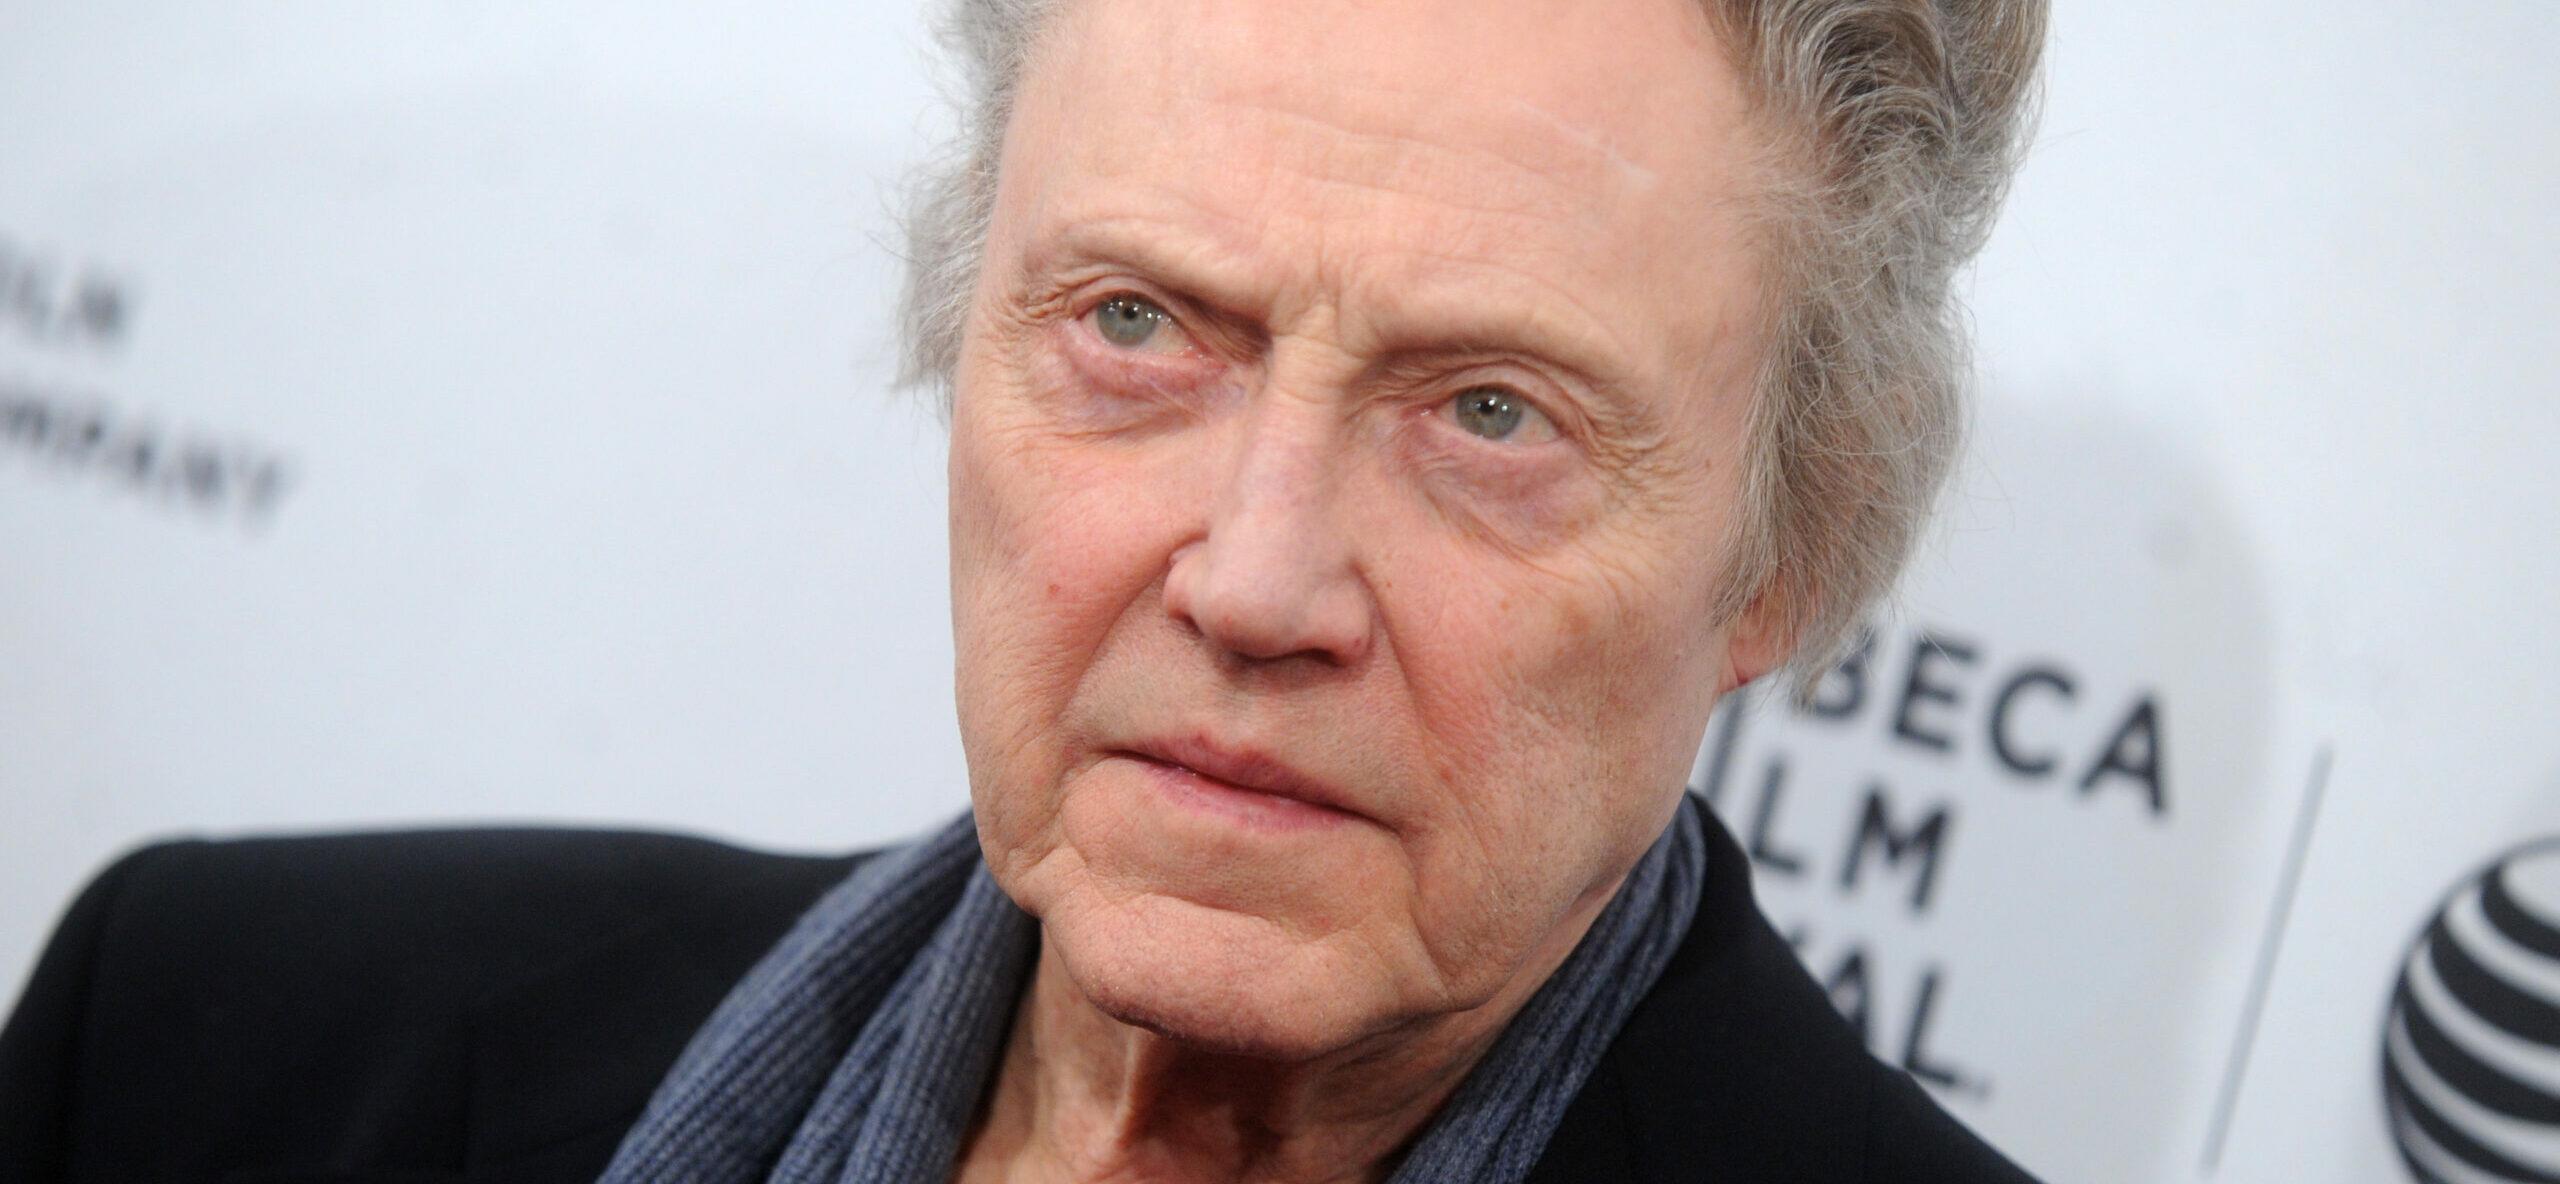 Christopher Walken attends the premiere of 'When I Live My Life Over Again' during the 2015 Tribeca Film Festival at the SVA Theater on April 18, 2015 in New York City.